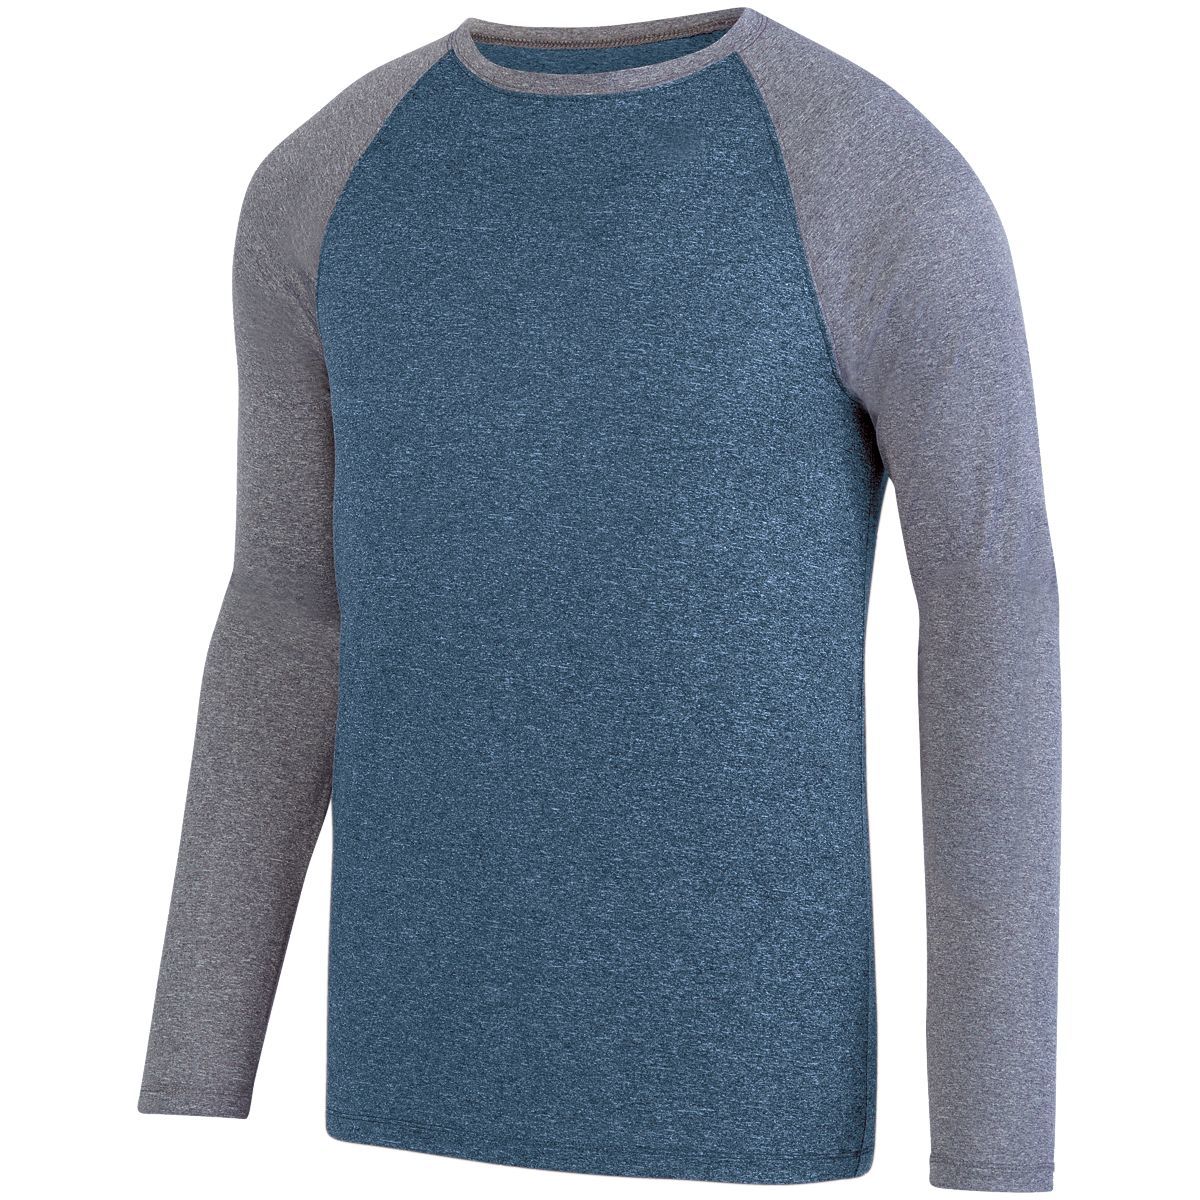 Augusta Sportswear Kinergy Two Color Long Sleeve Raglan Tee in Navy Heather/Graphite Heather  -Part of the Adult, Adult-Tee-Shirt, T-Shirts, Augusta-Products, Shirts product lines at KanaleyCreations.com